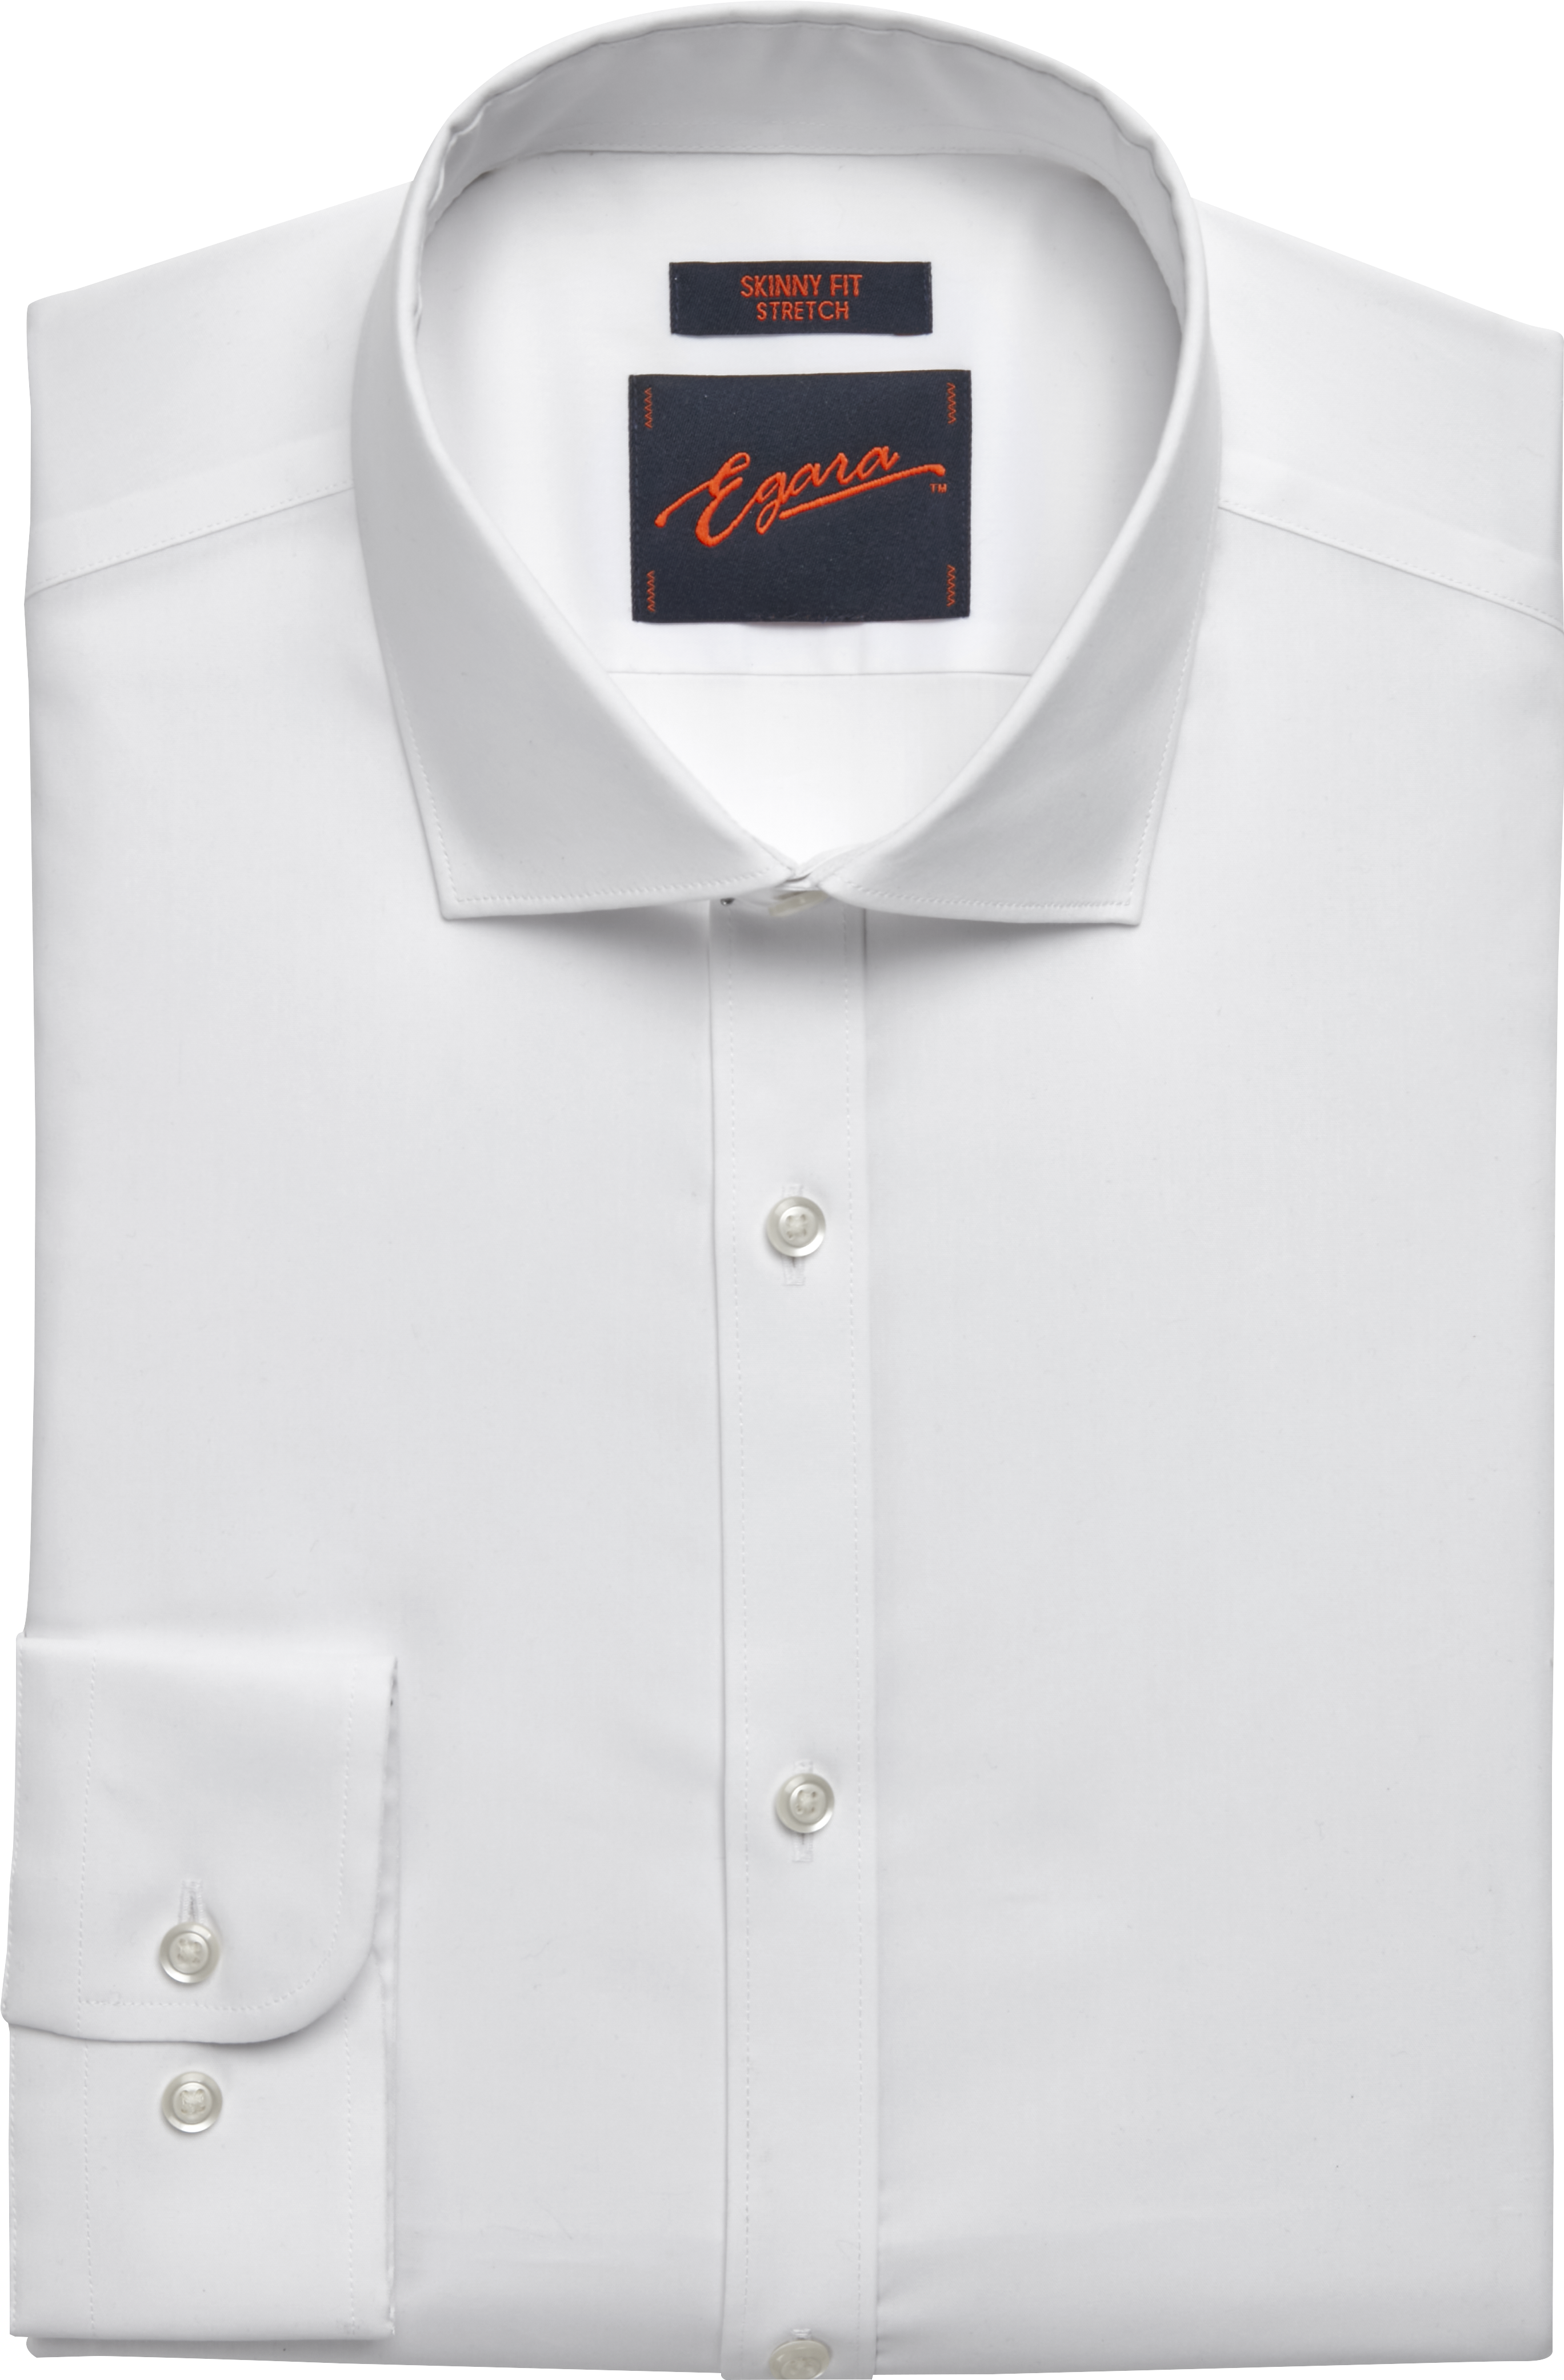 e.s. Business shirt cotton stretch, comfort fit white